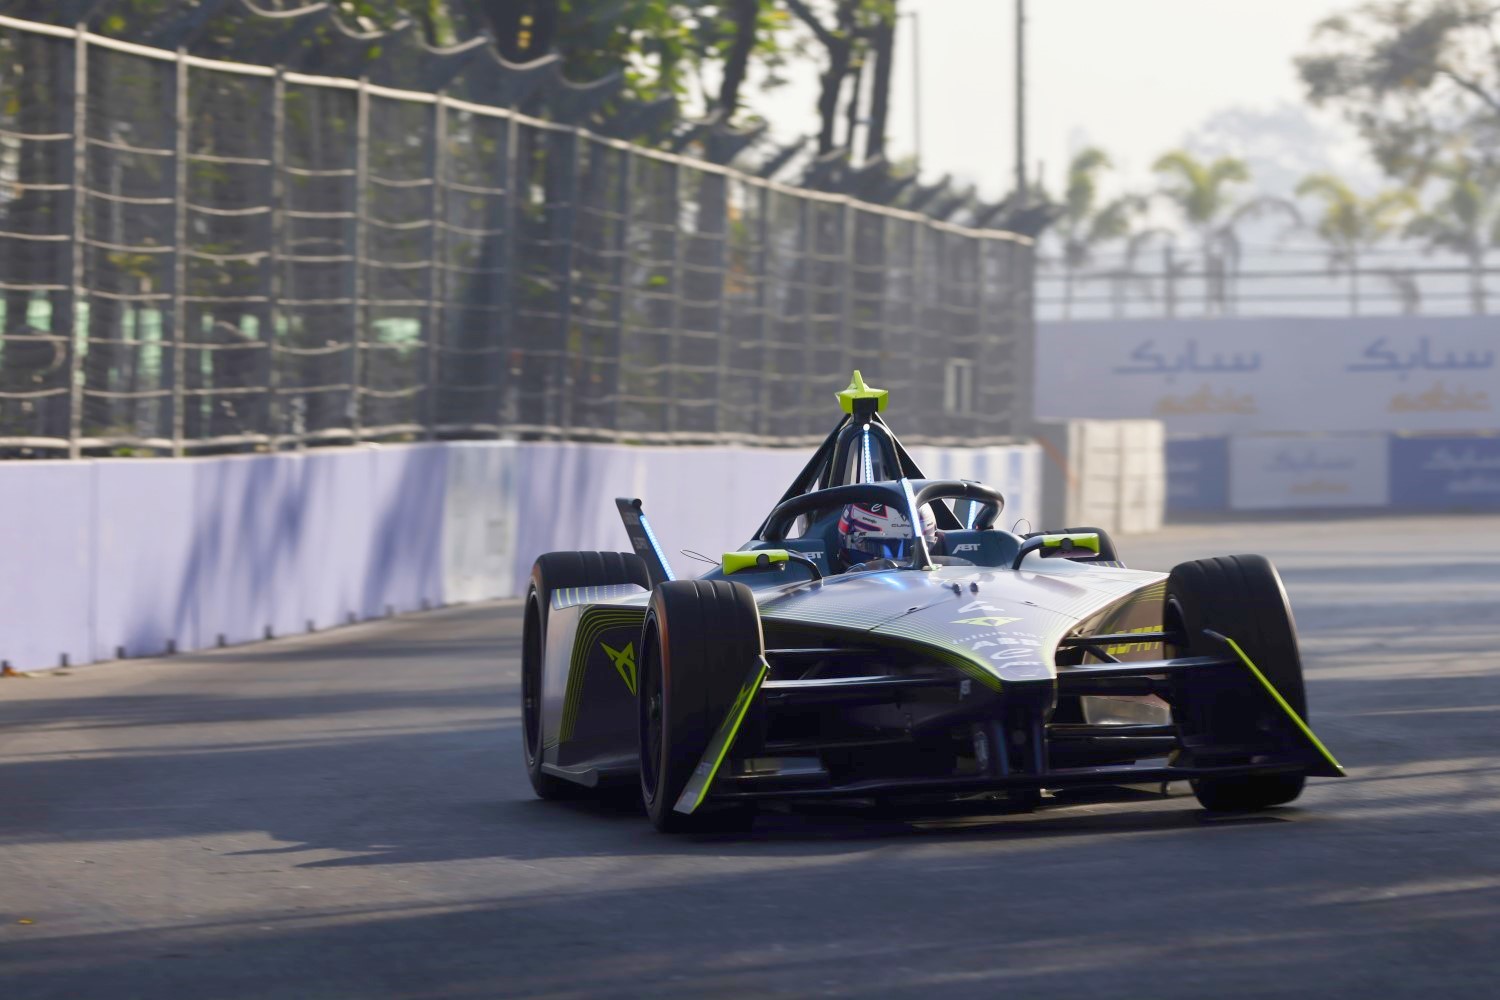 Kelvin van der Linde, ABT CUPRA Formula E Team, M9Electro during the Hyderabad ePrix at Hyderabad Street Circuit on Saturday February 11, 2023, India. (Photo by Andrew Ferraro / LAT Images)